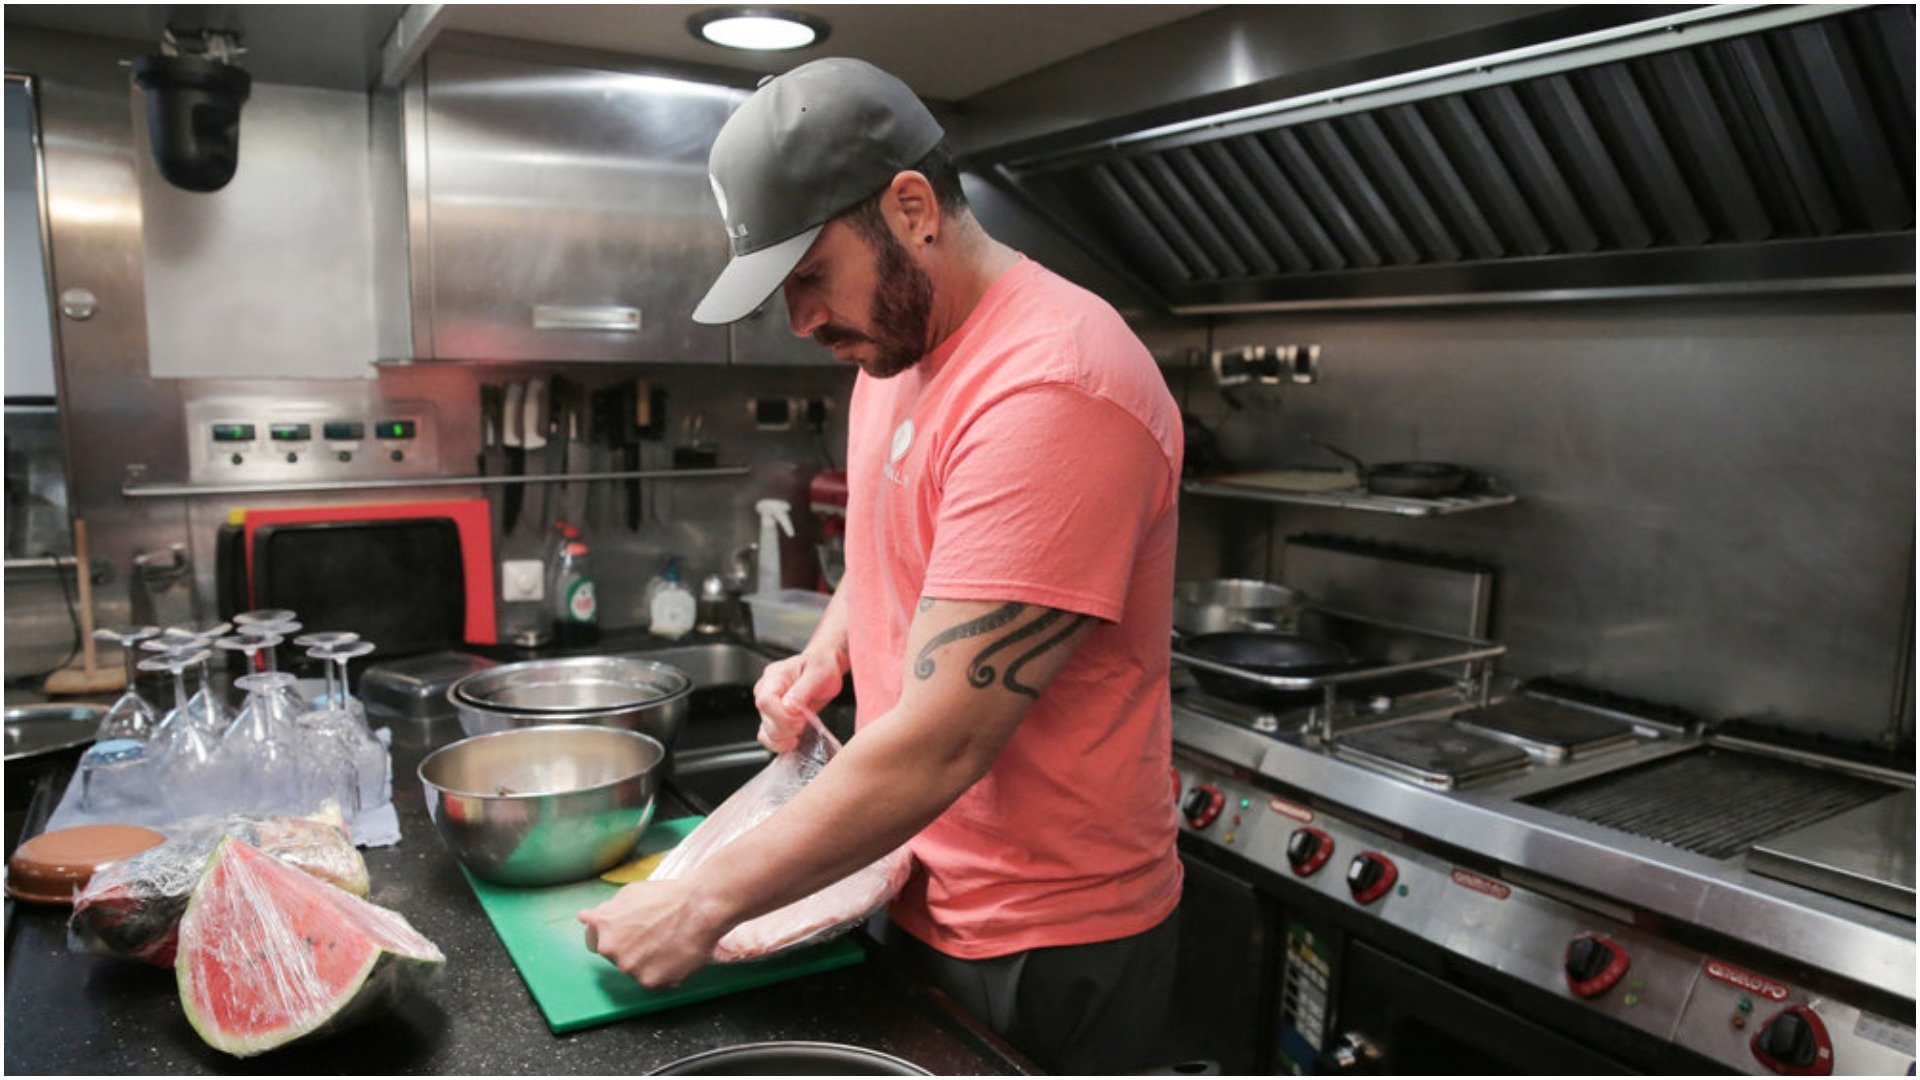 Chef Marcos Spaziani from 'Below Deck Sailing Yacht' prepares food in the galley kitchen 